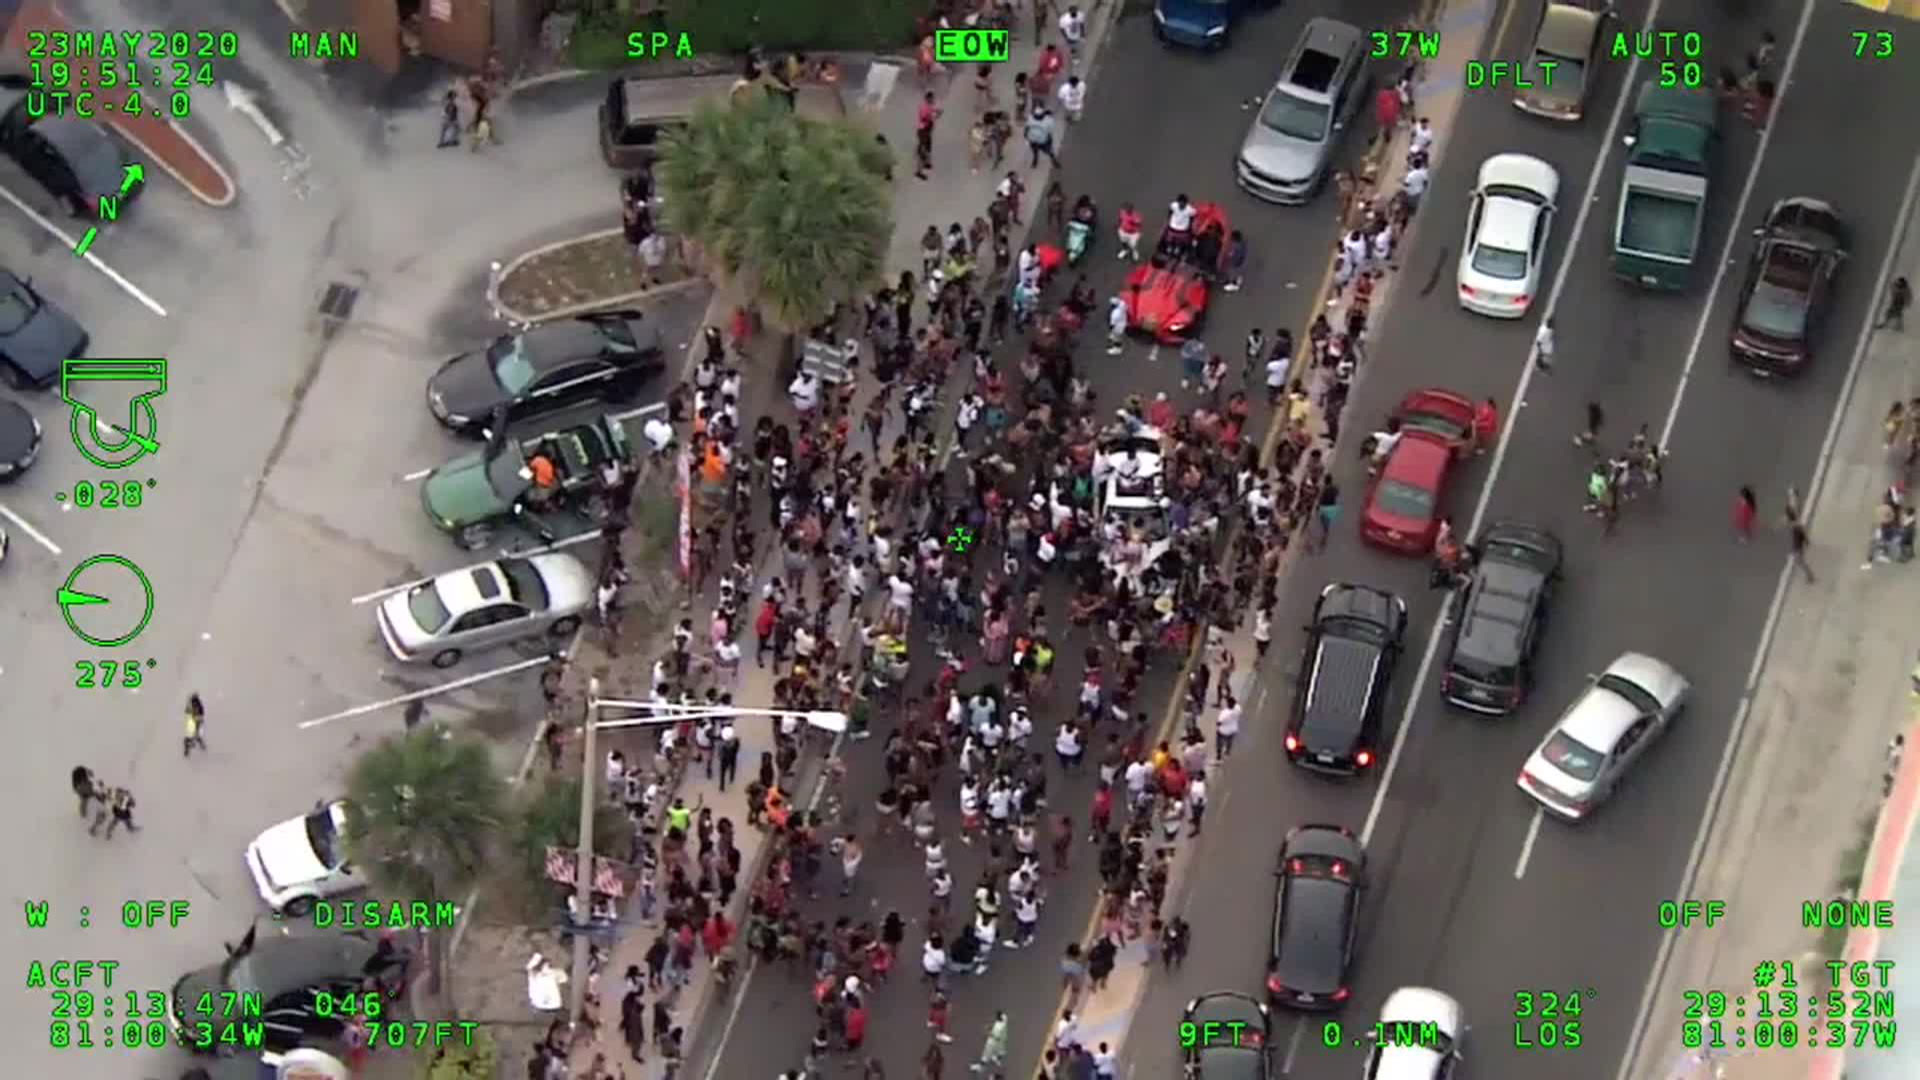 Aerial footage from the Volusia County Sheriff's Office shows large crowds blocking the streets in Daytona Beach